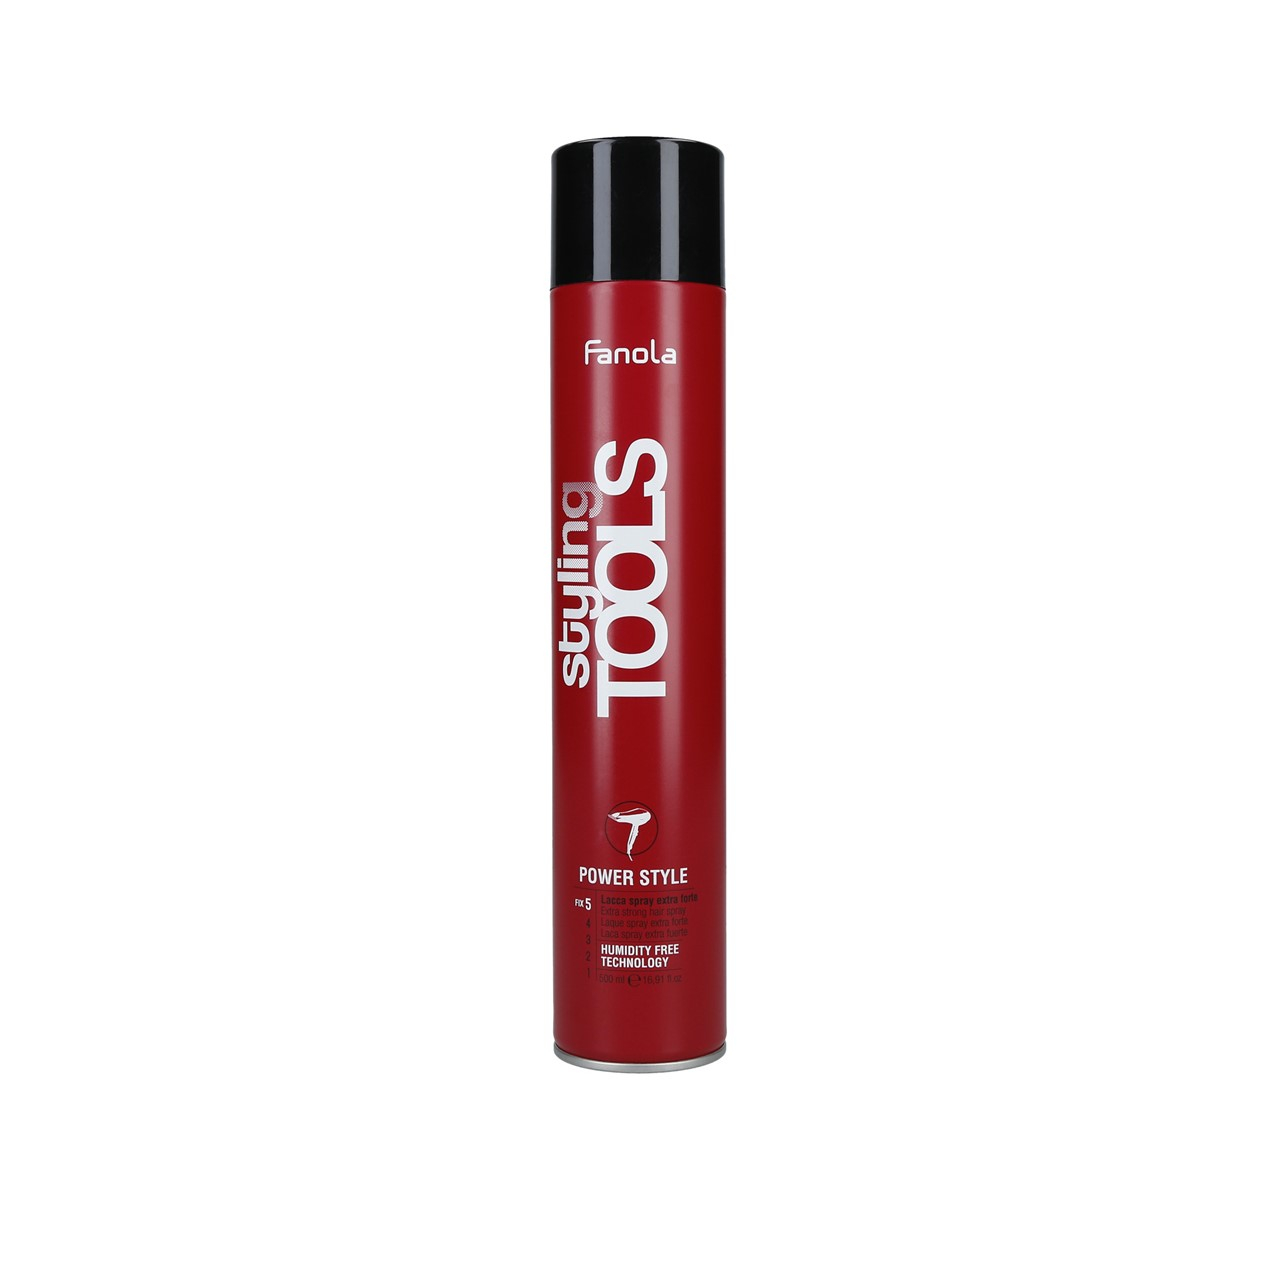 Fanola Styling Tools Power Style Extra Strong Hair Spray 500ml (16.91 fl oz)